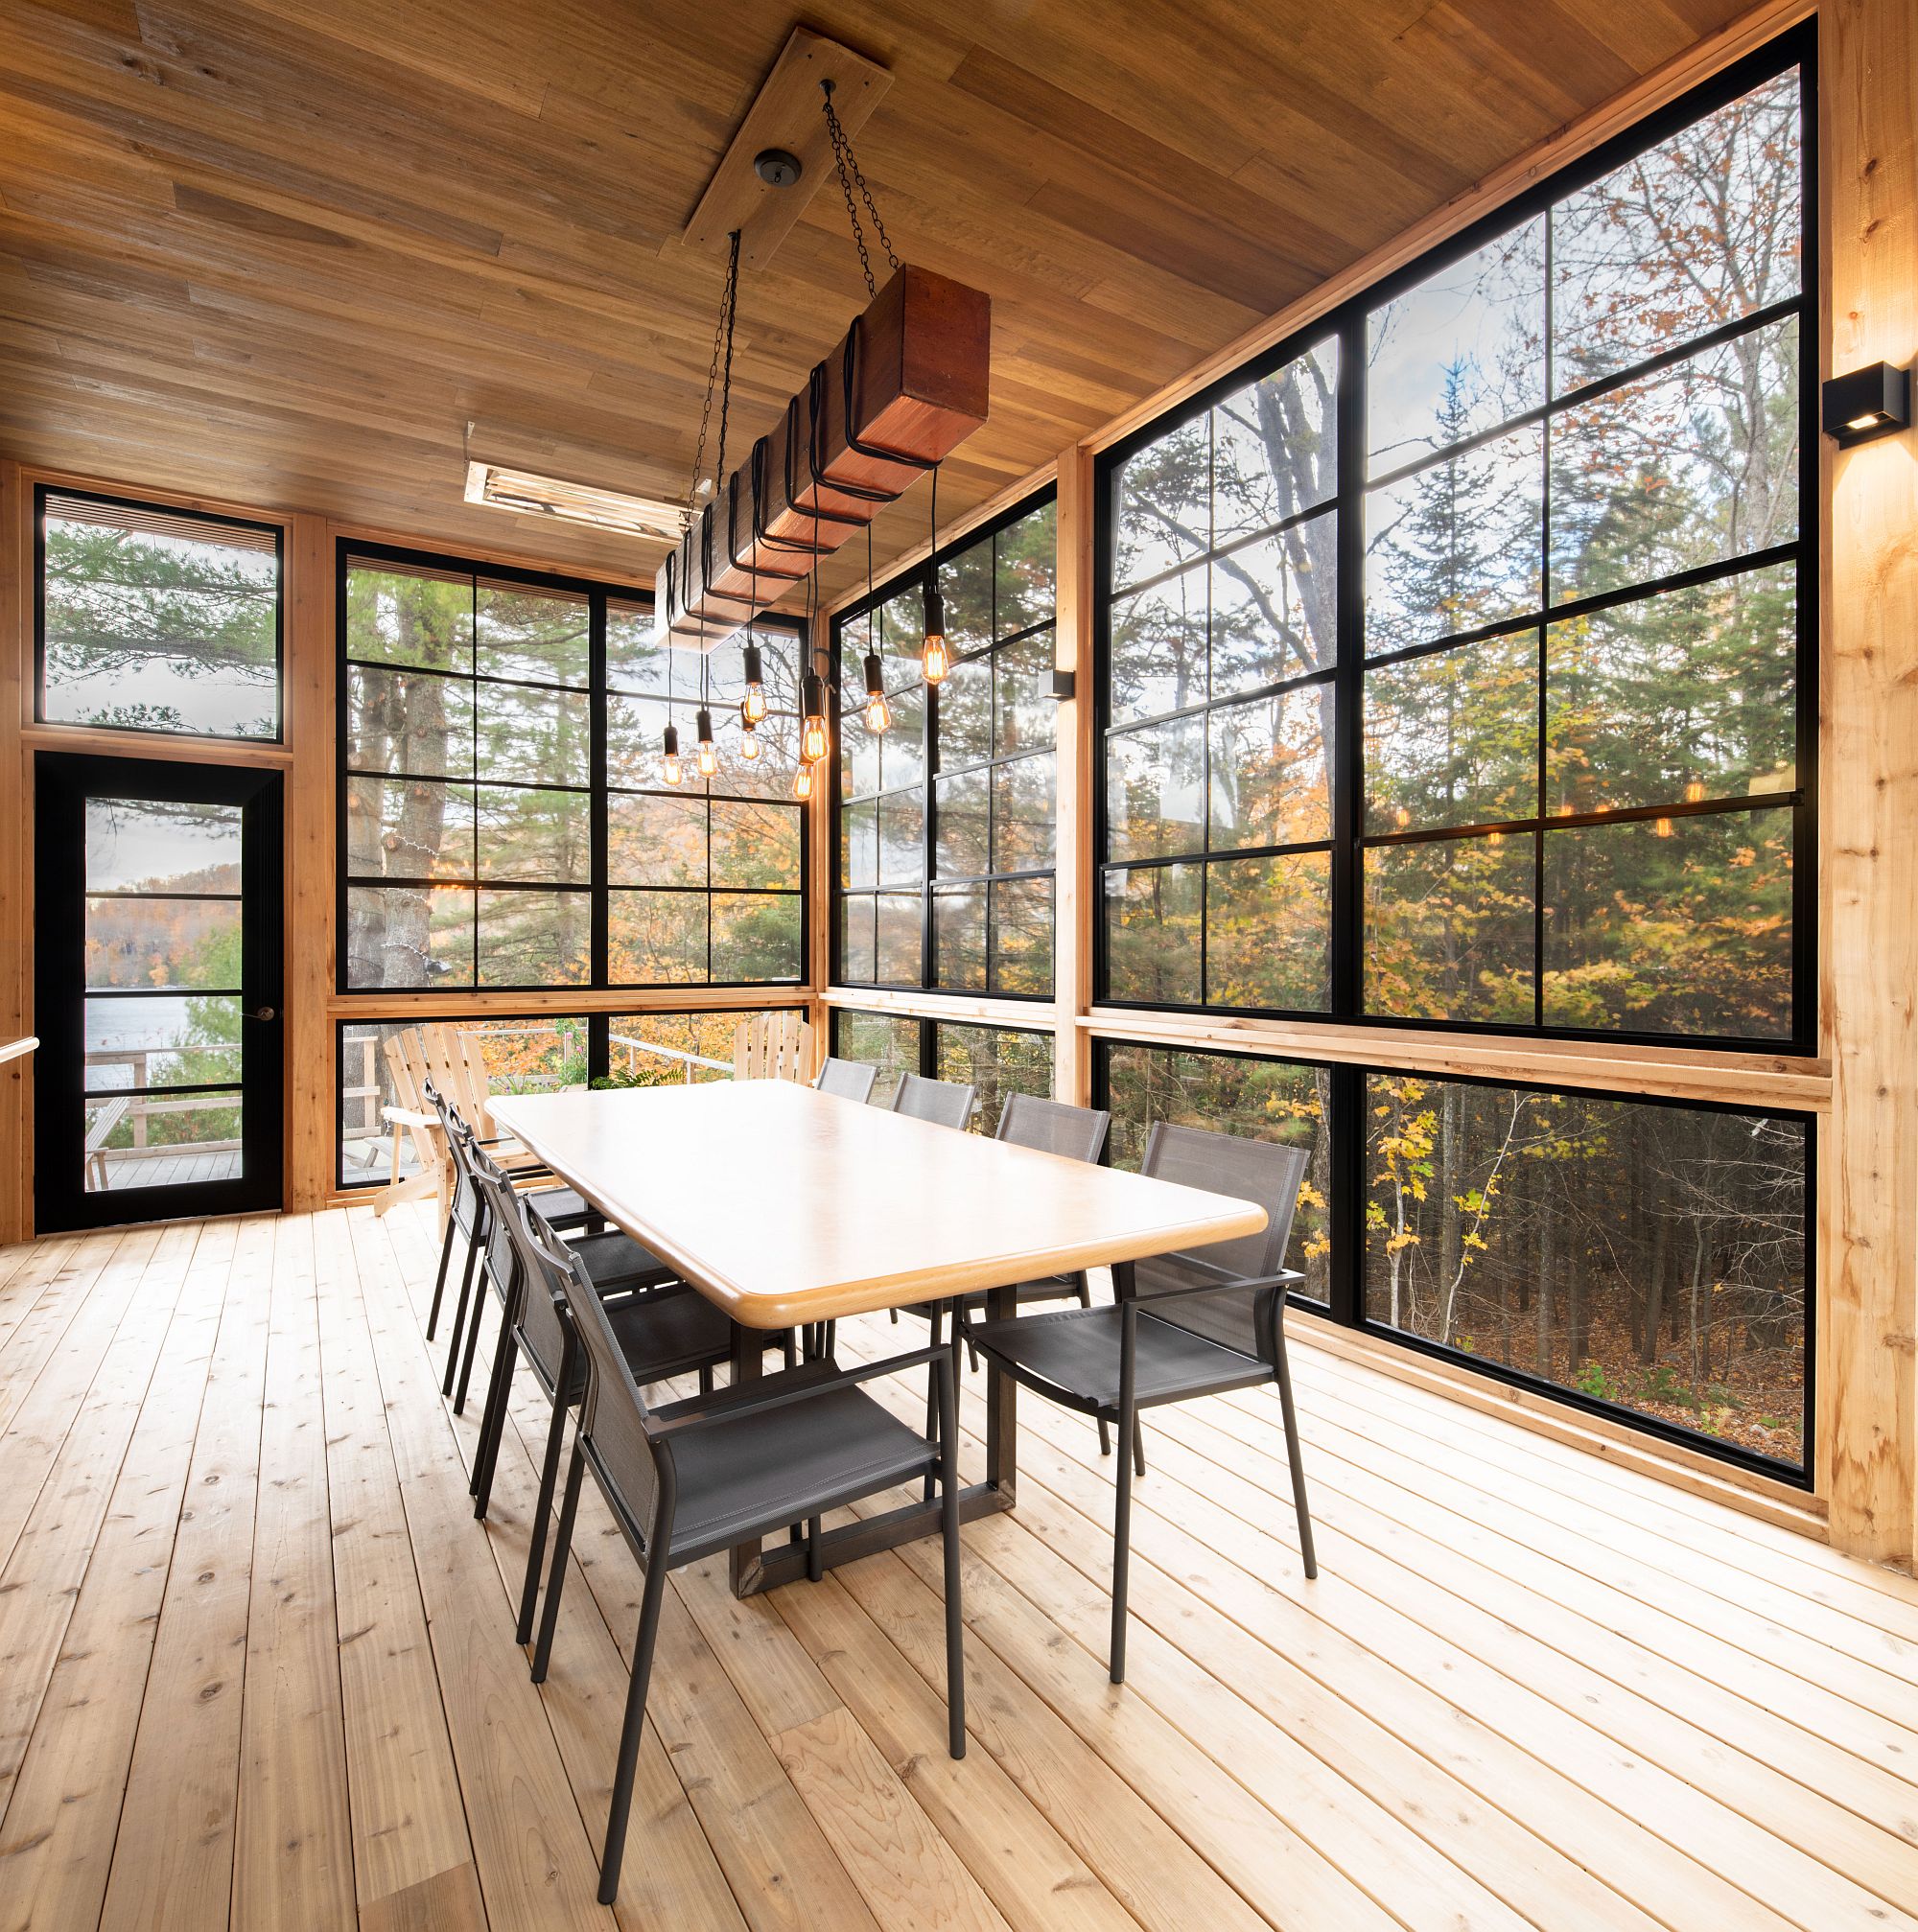 Dark framed windows and doors usher nature into the expansive dining space